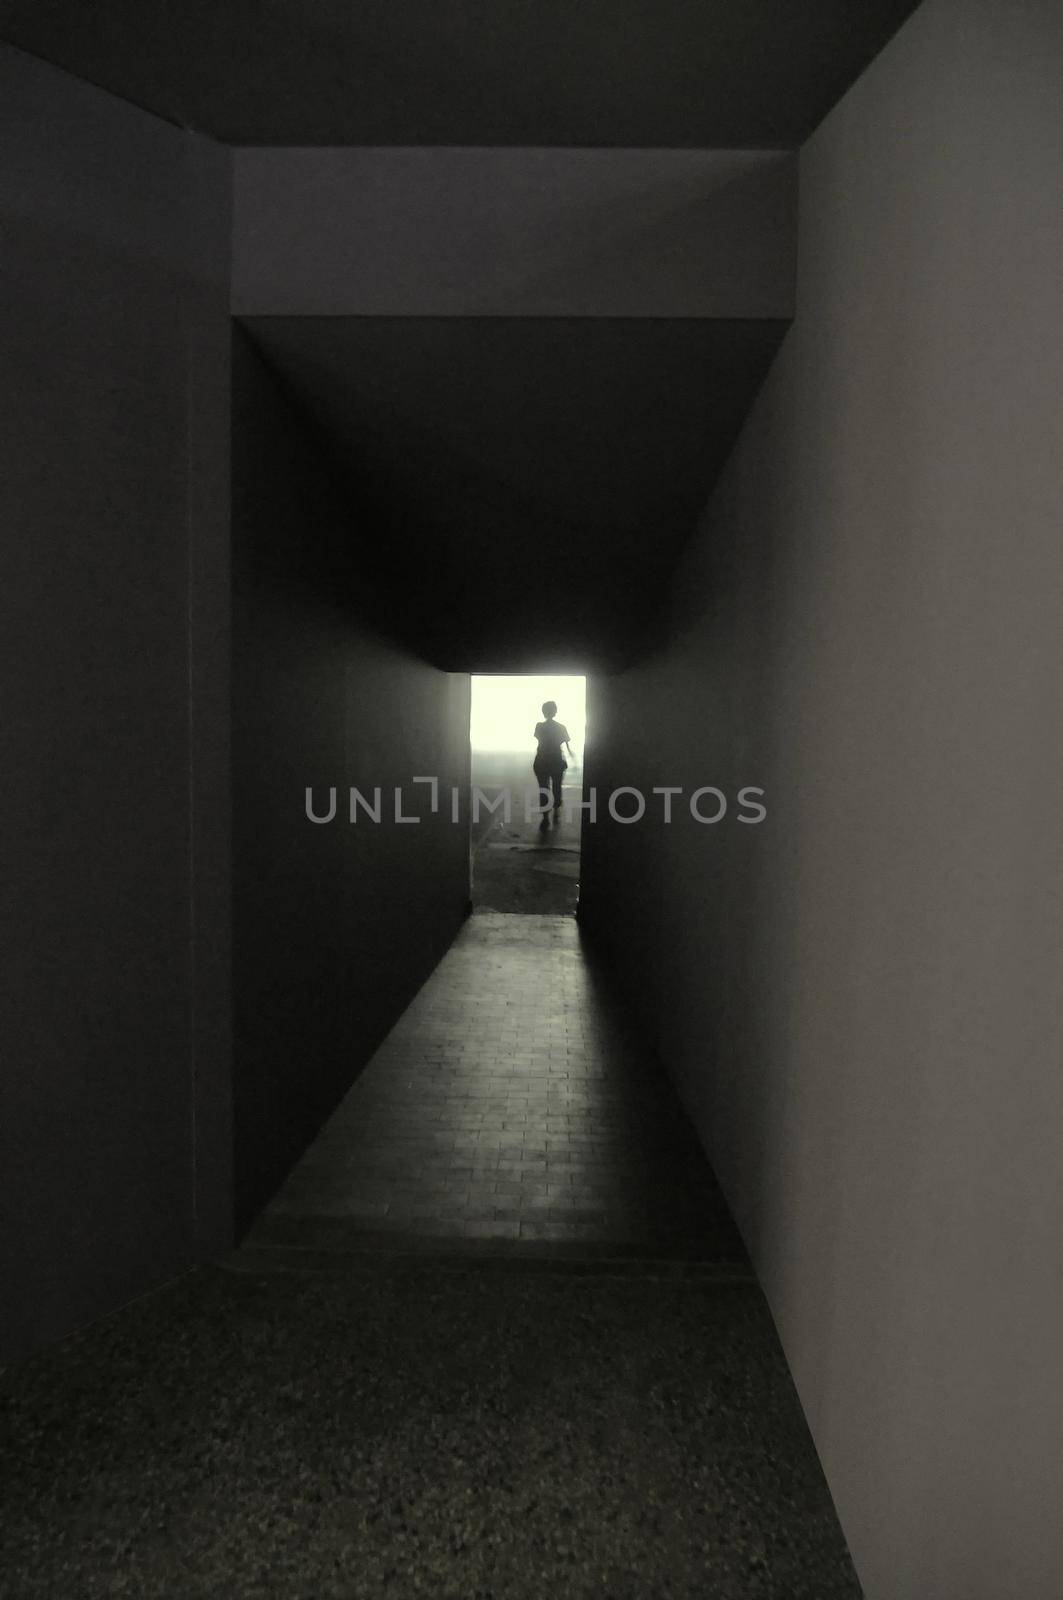 Iconic black and white picture of dark narrow corridor with individual silhouette escaping to light